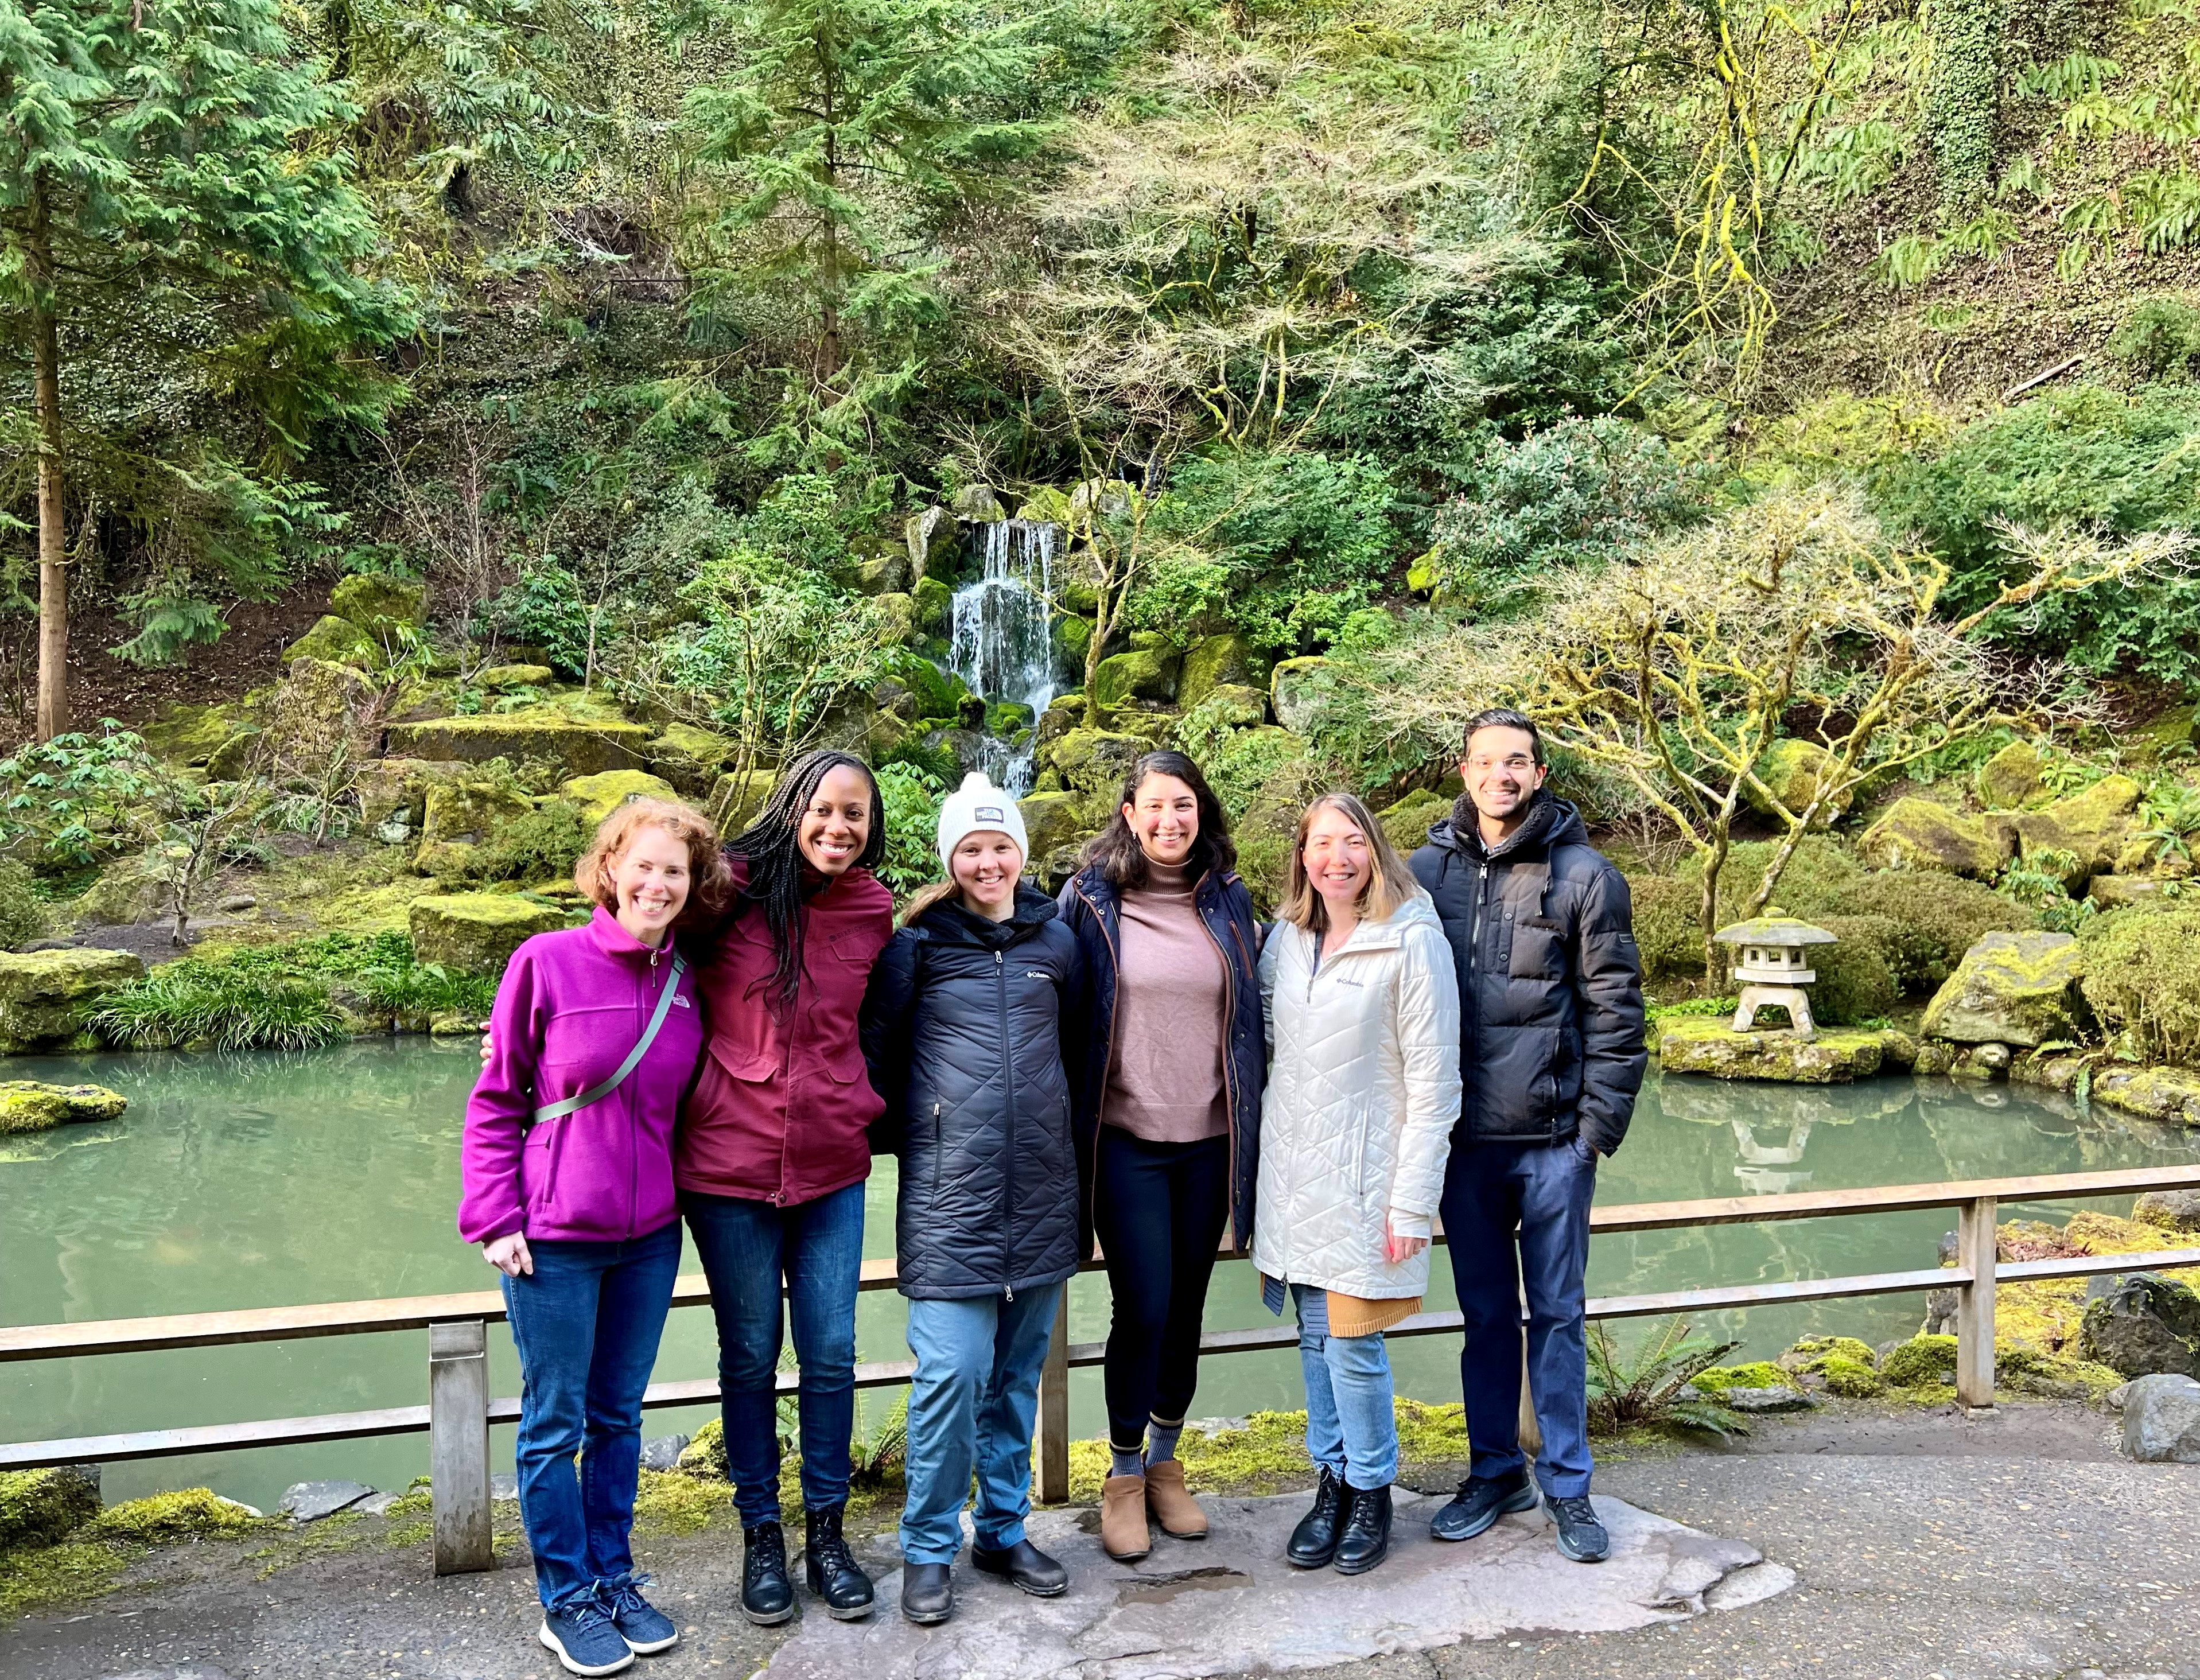 Photograph of PDs and fellows at Japanese Garden